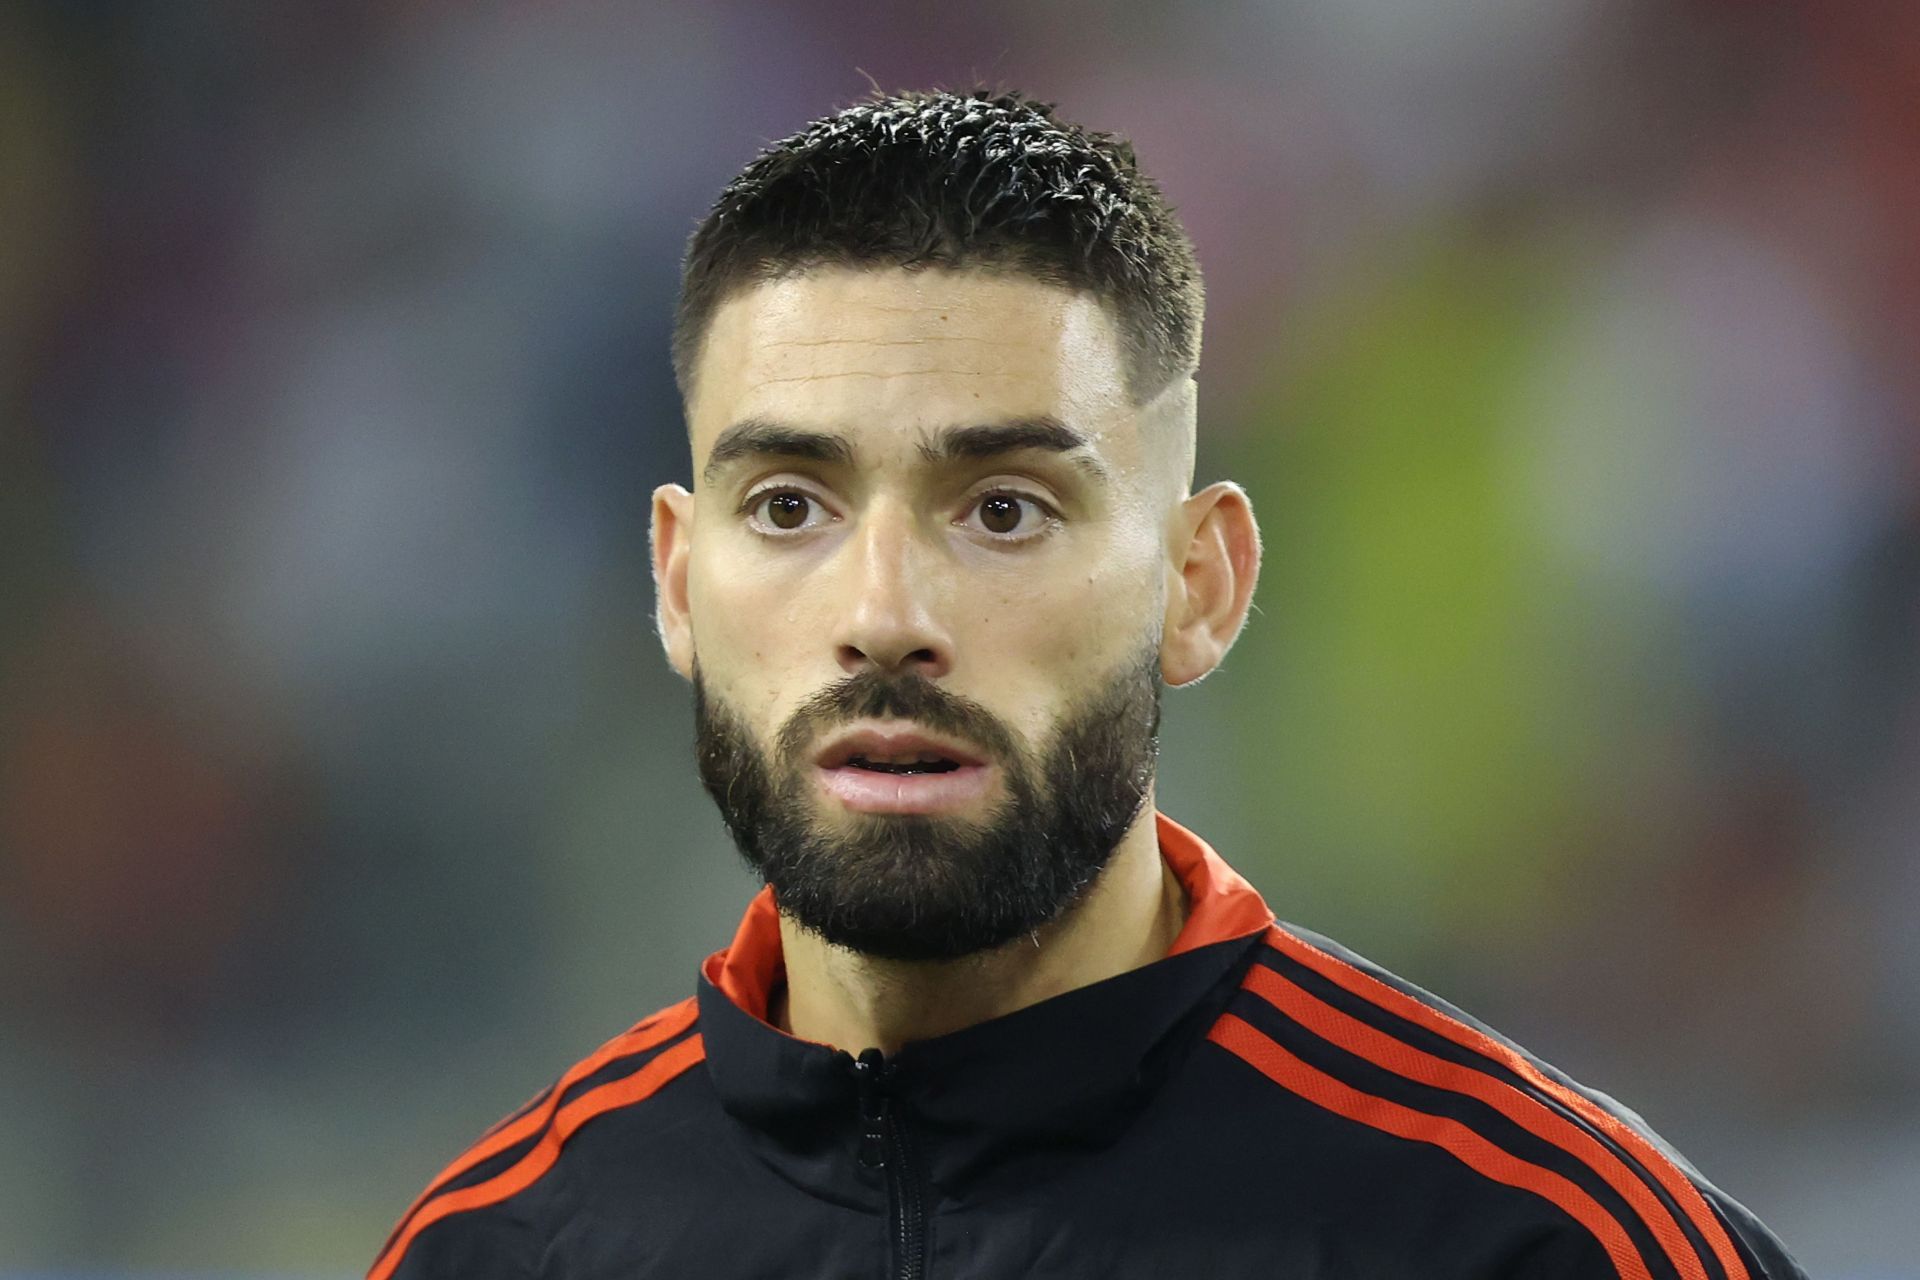 Yannick Carrasco has been an extremely dependable player for Belgium over the years